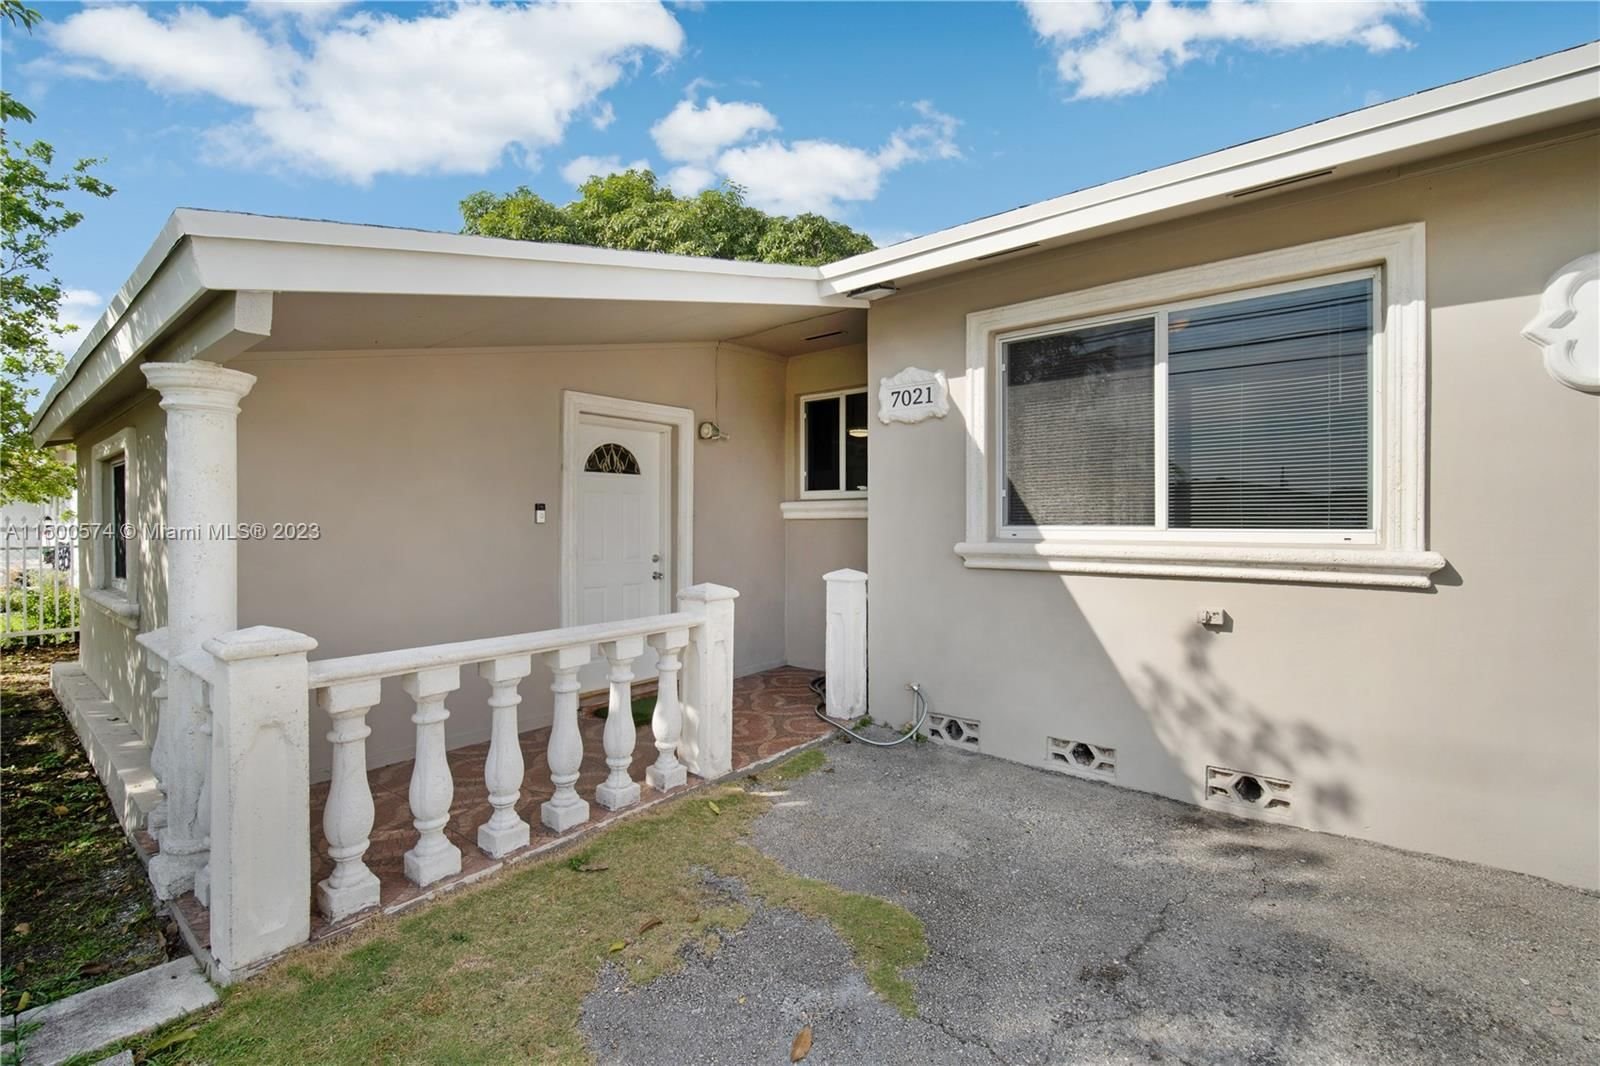 Real estate property located at 7021 16th St, Miami-Dade County, TAMIAMI CITY REVISED, Miami, FL